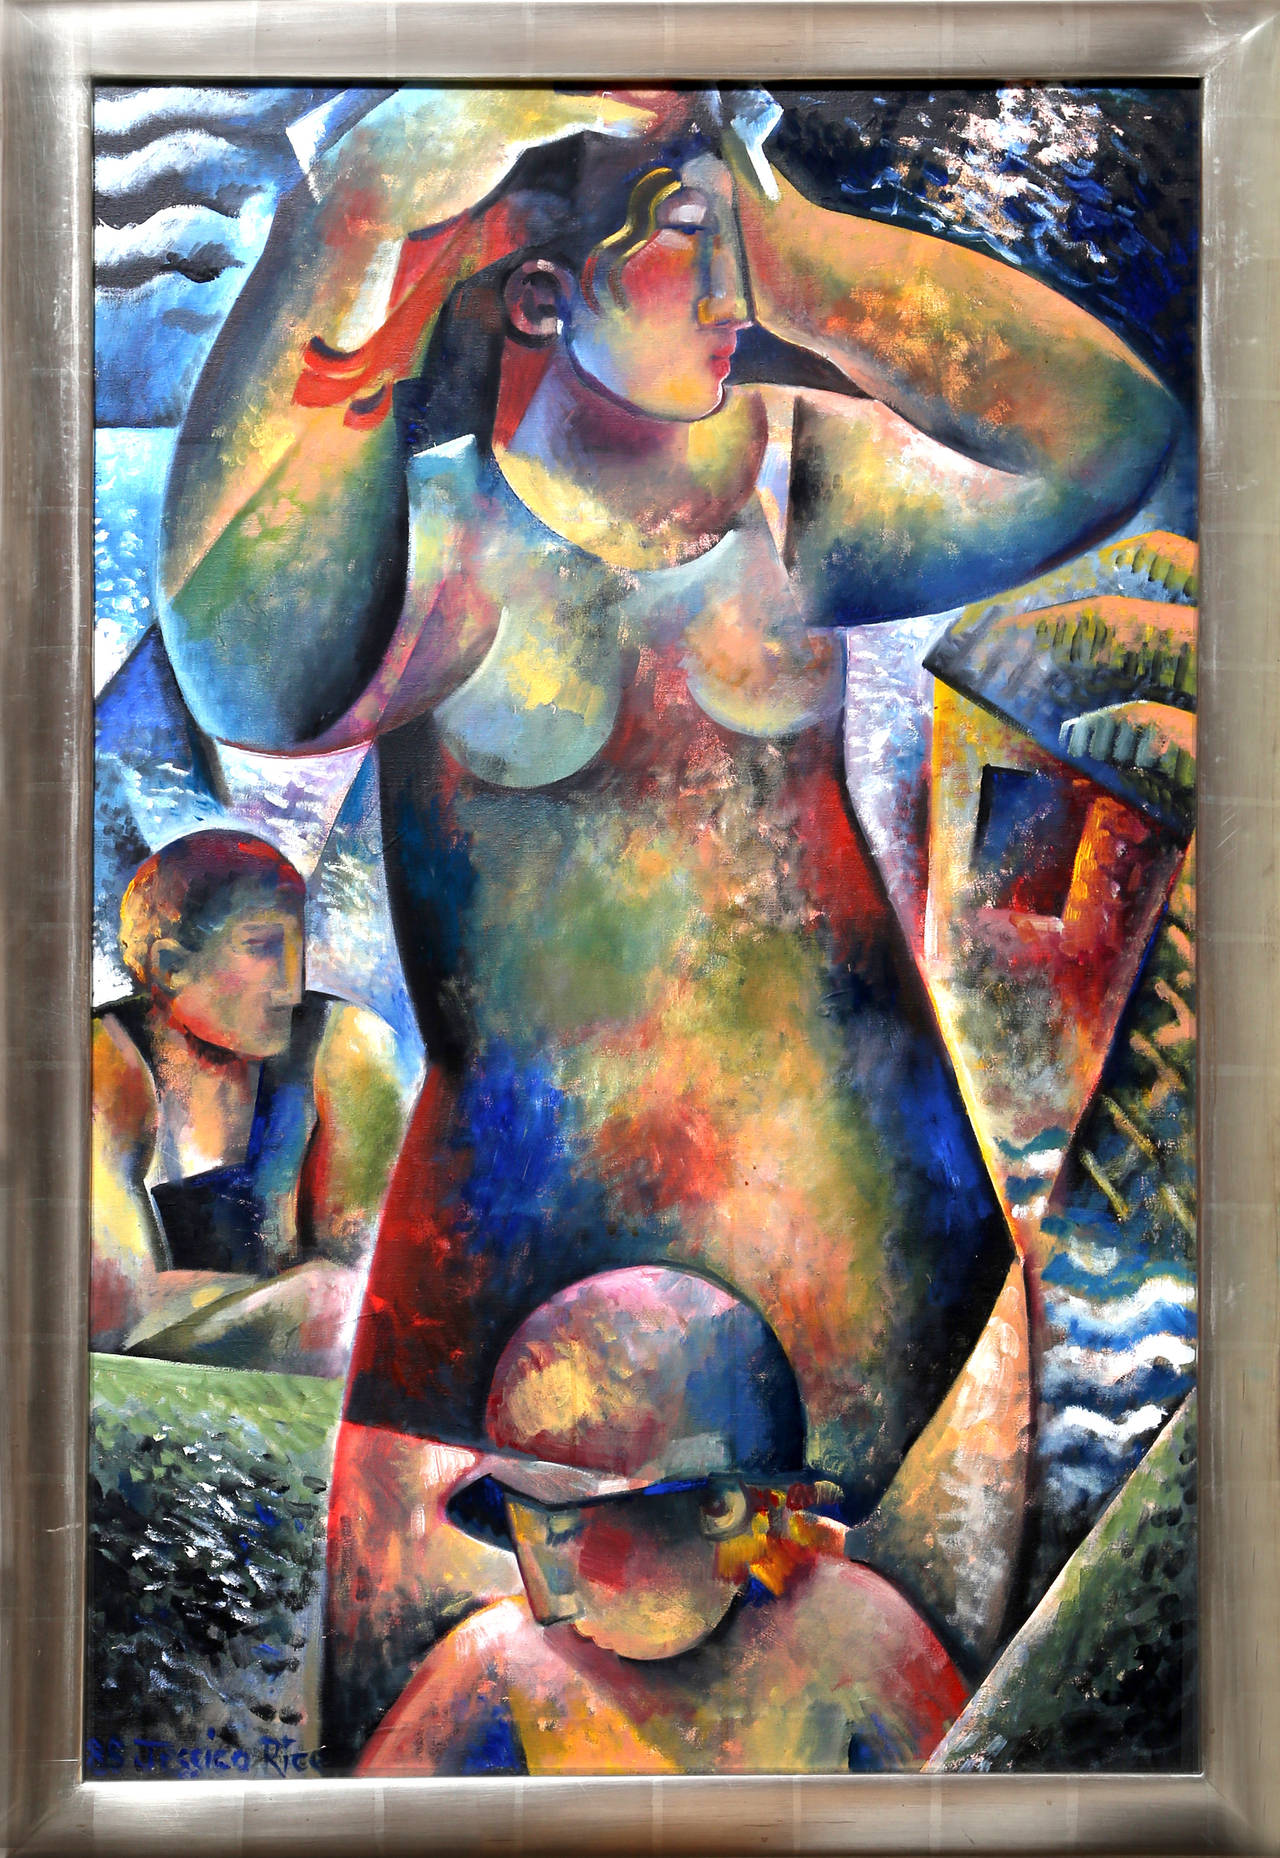 Bathers, Large Cubist Painting by Jessica Rice